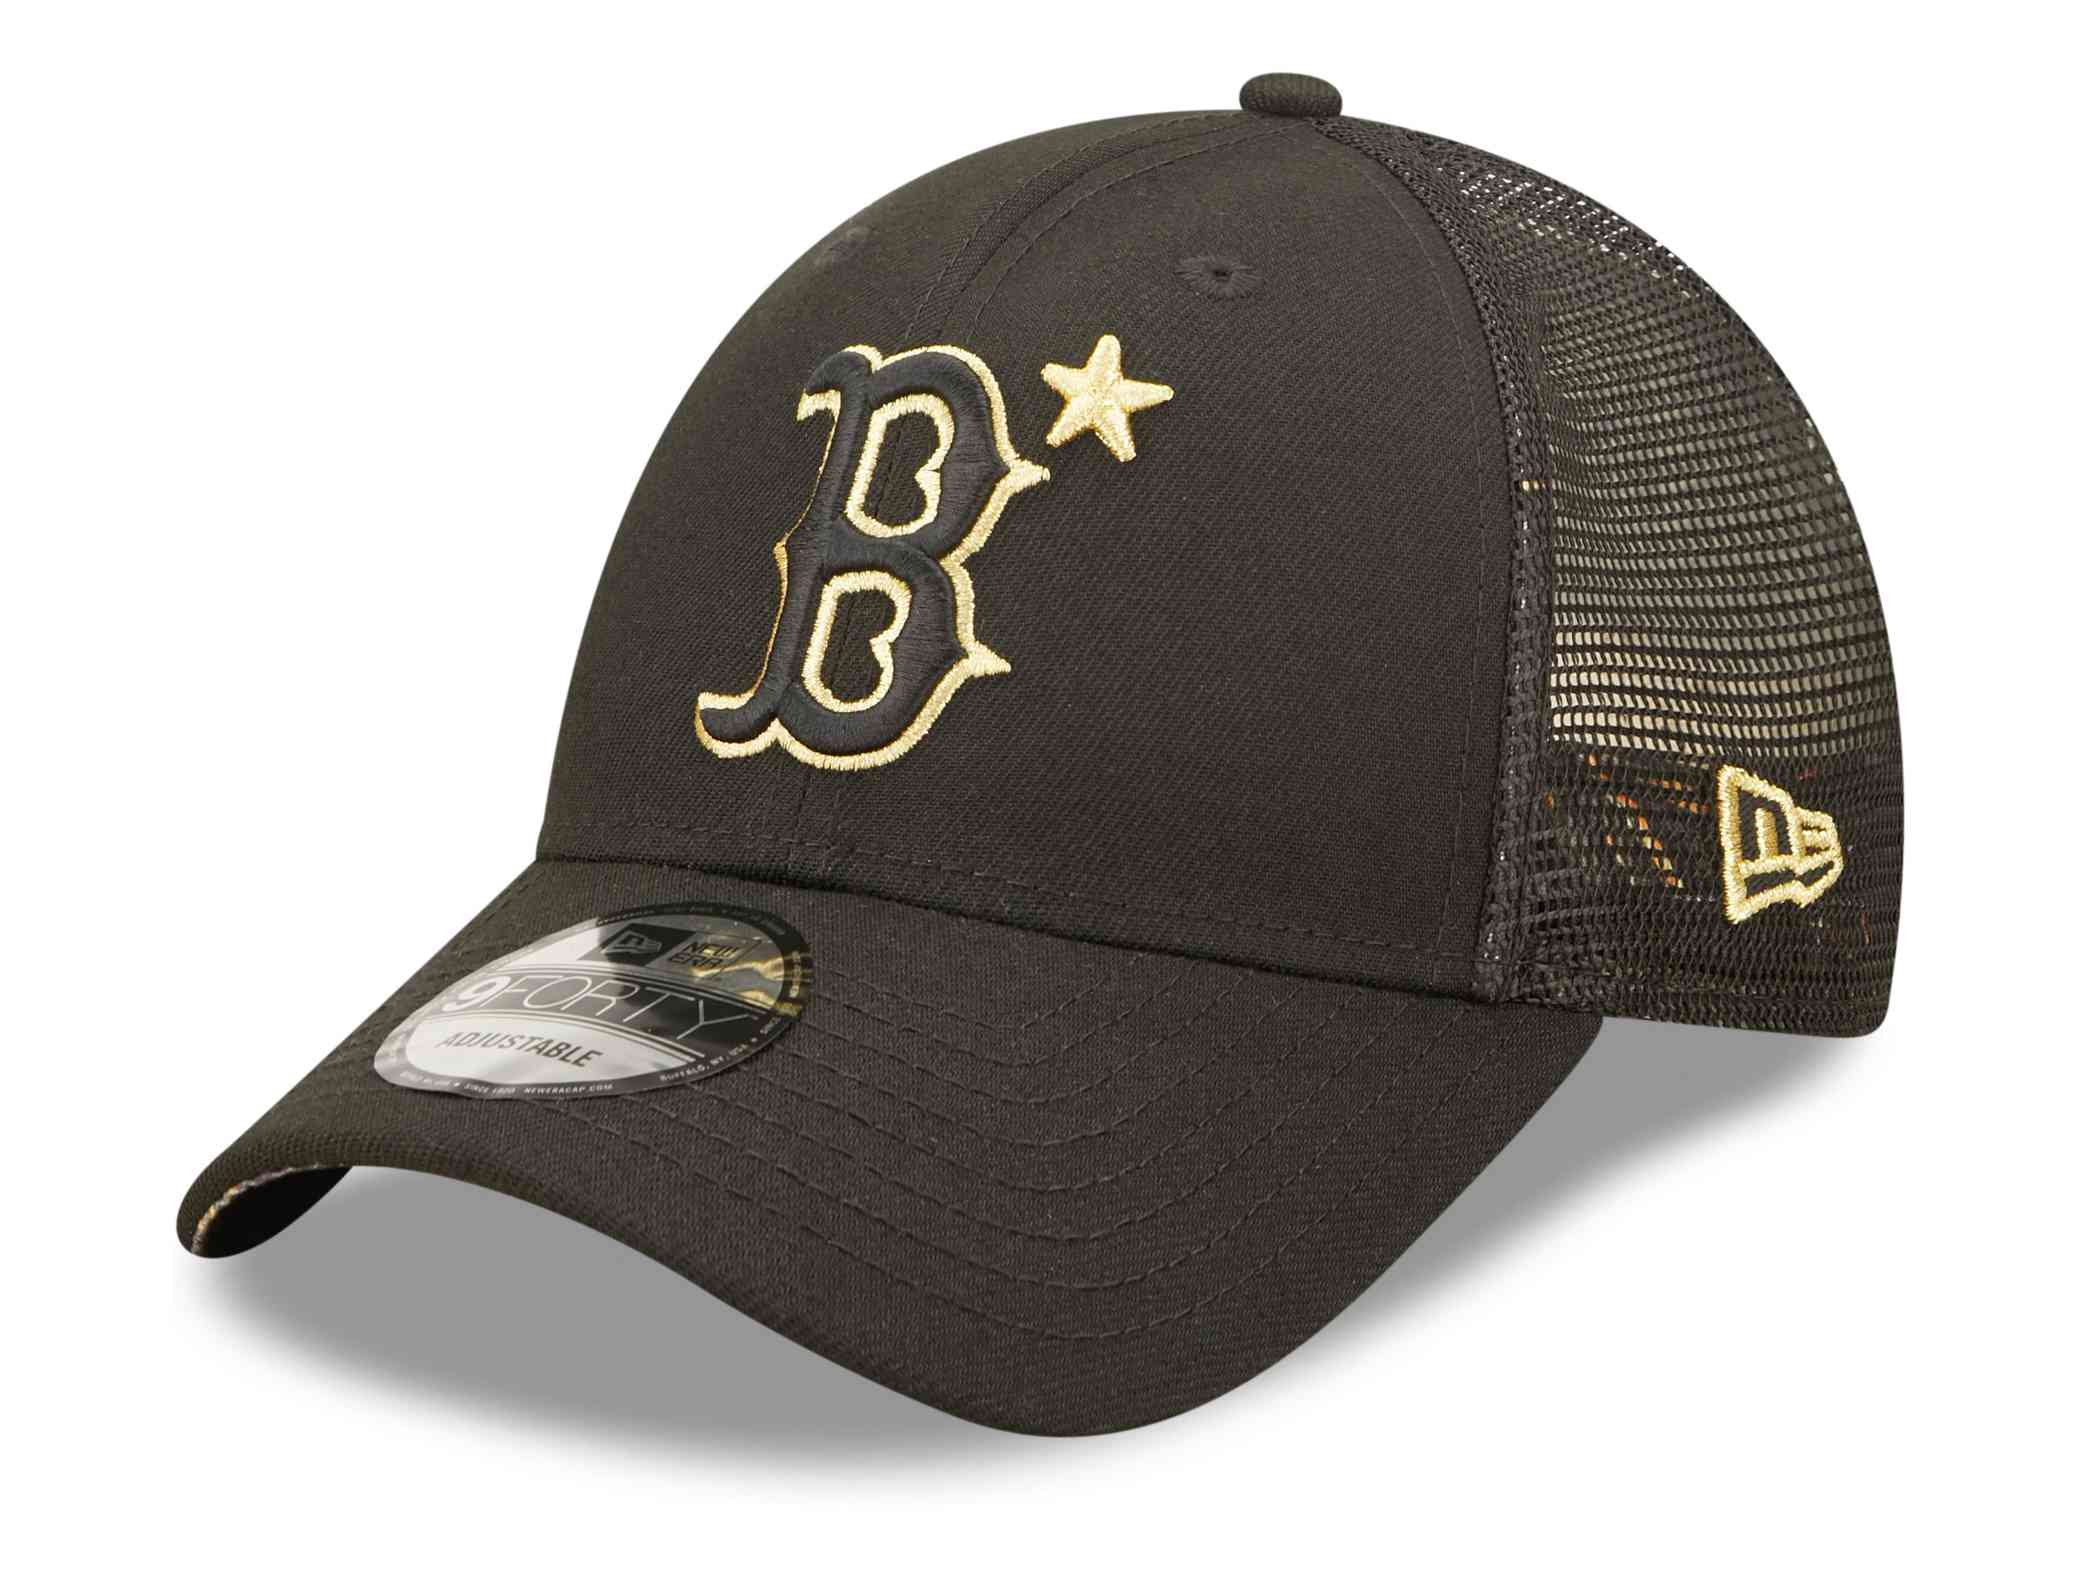 New Era - MLB Boston Red Sox All Star Game Patch 9Forty Snapback Cap